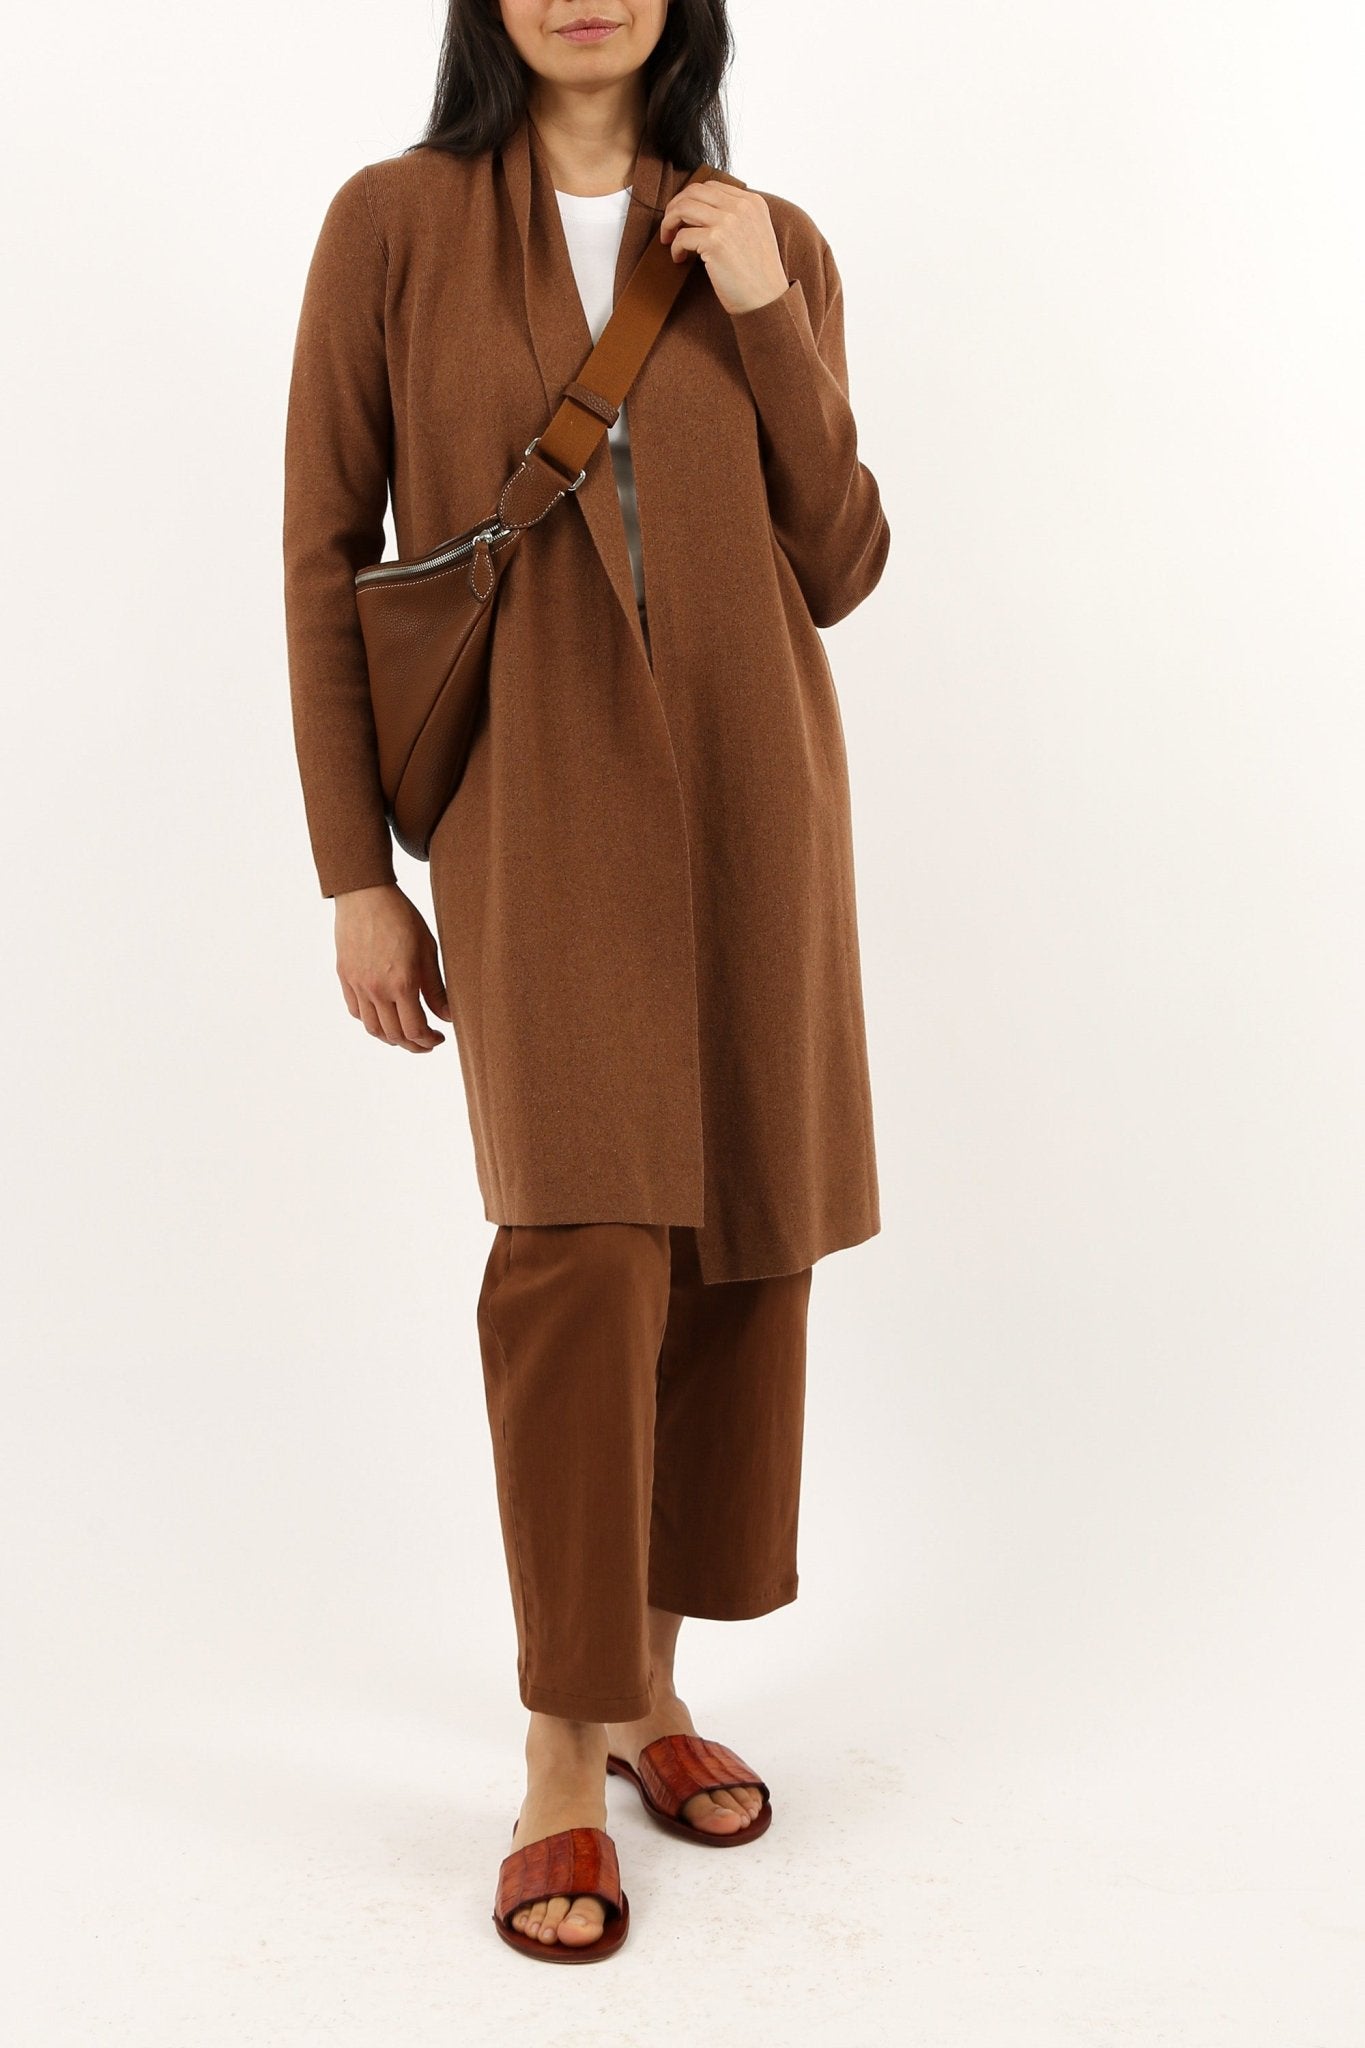 CORNELIA DUSTER IN DOUBLE KNIT HEATHERED PIMA COTTON IN SADDLE BROWN HEATHER - Jarbo